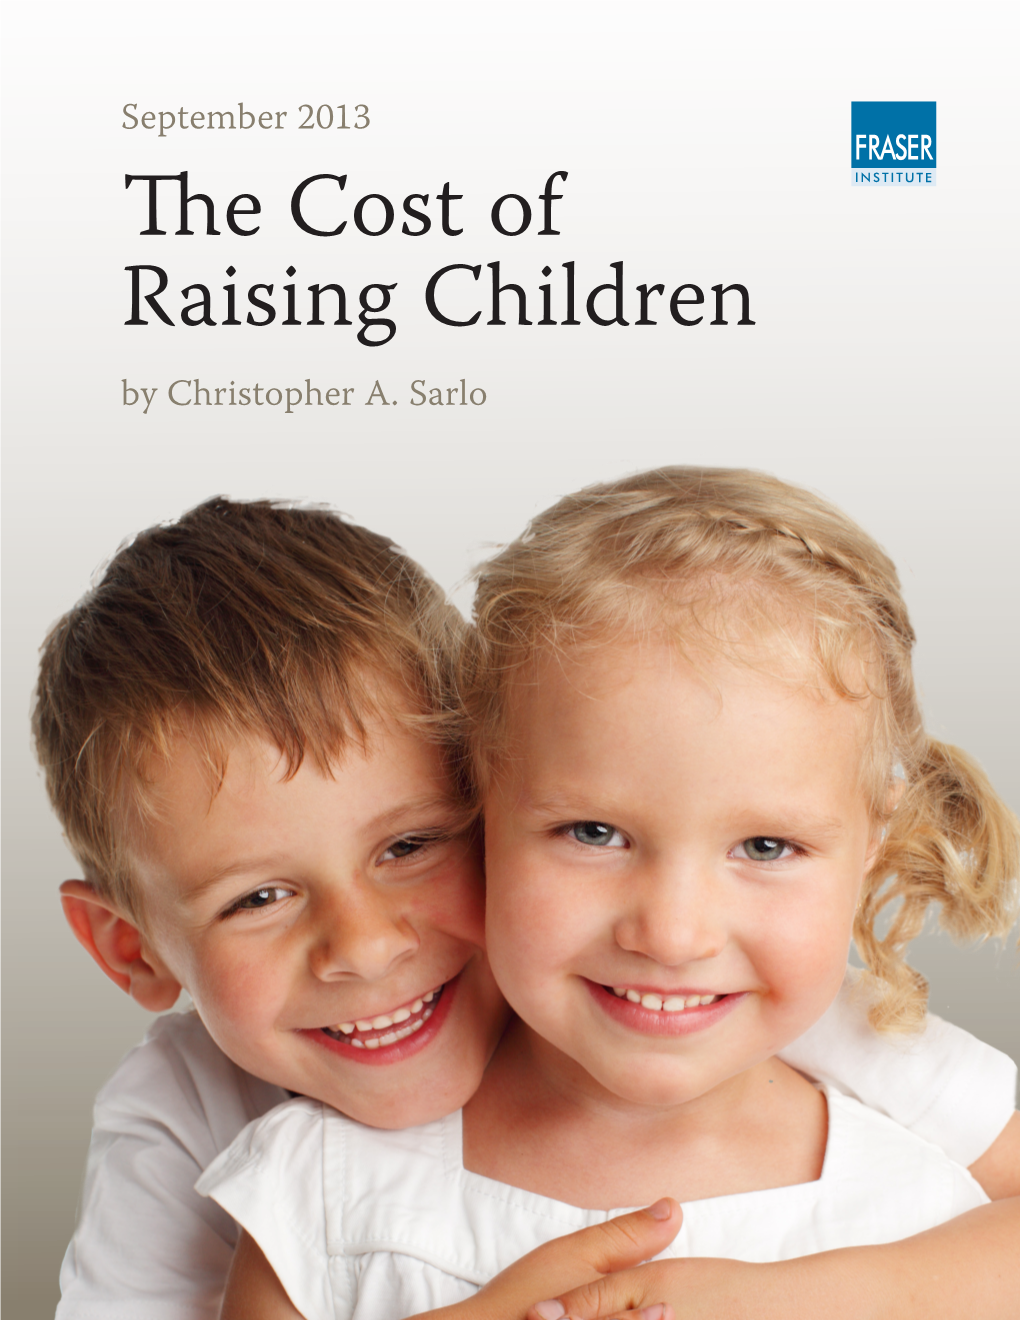 The Cost of Raising Children by Christopher A